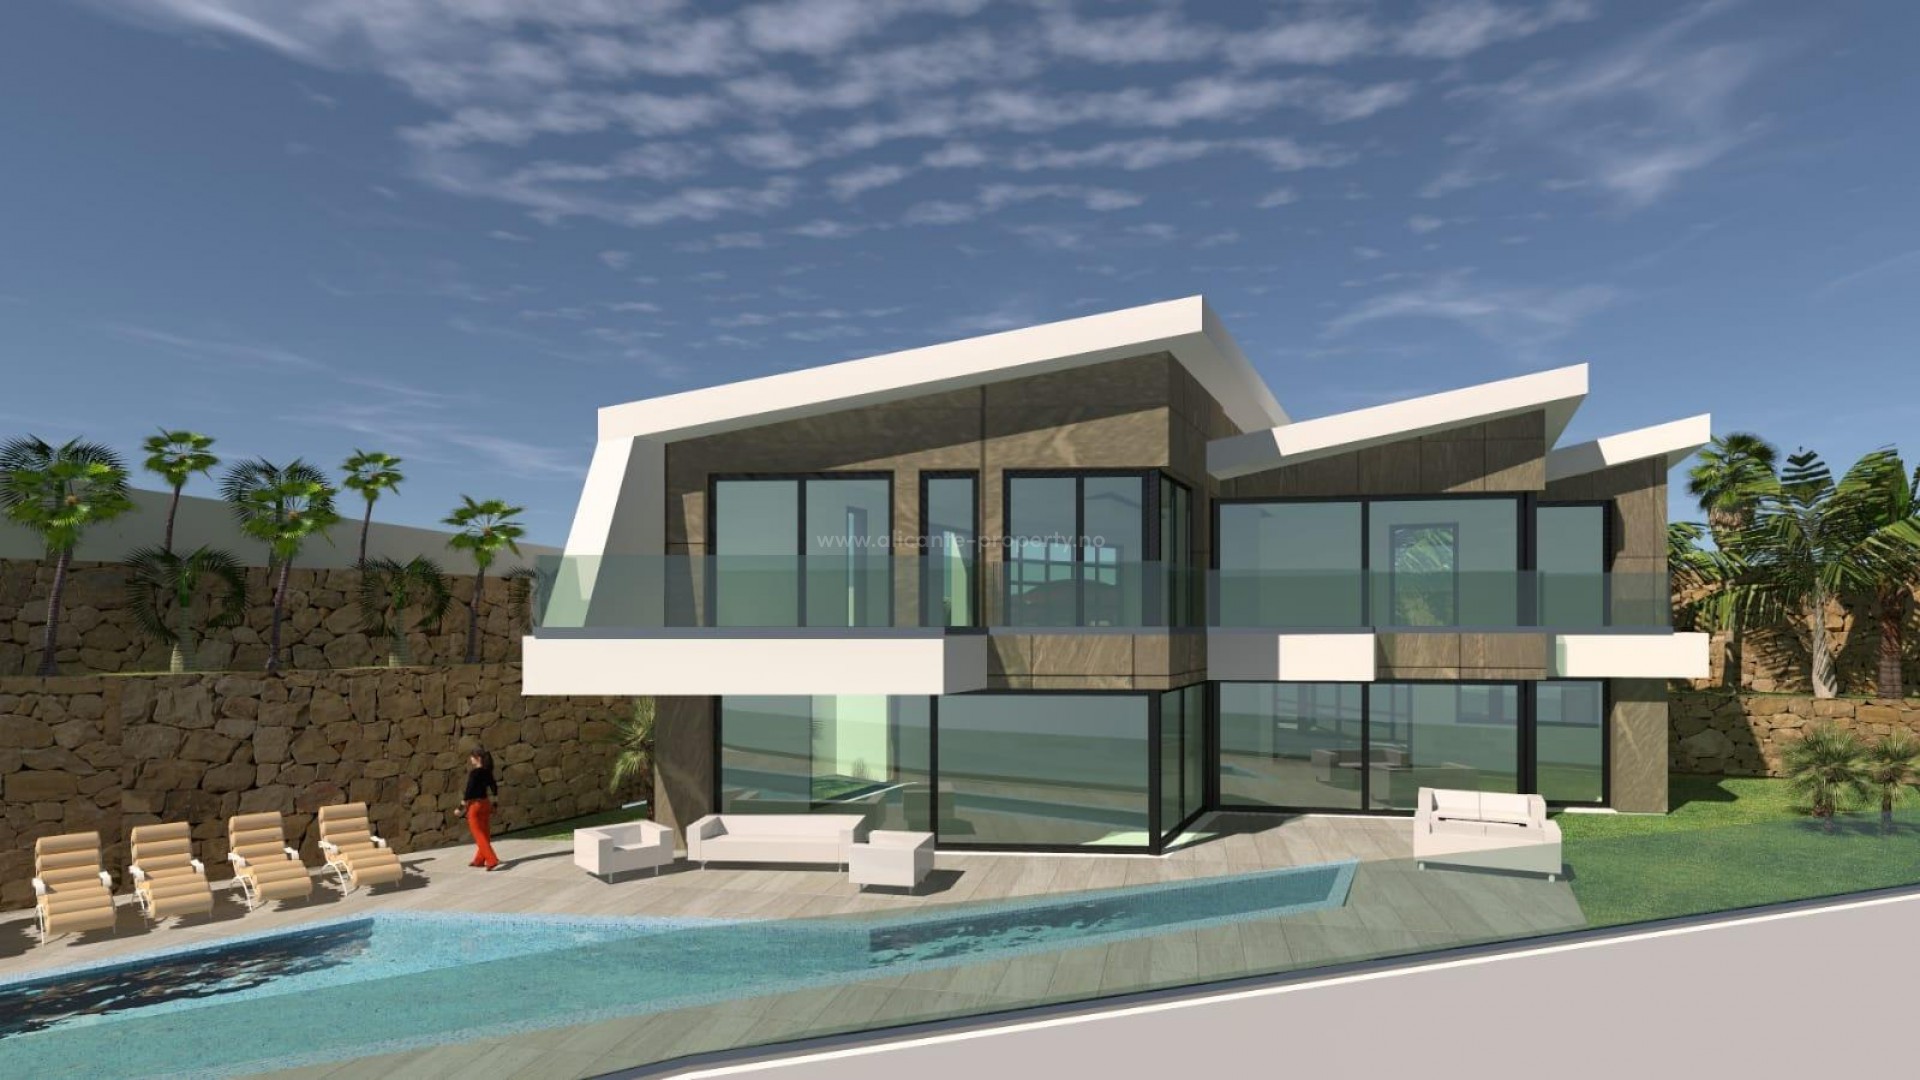 New built luxury villa with sea view in Calpe, 4 bedrooms, 5 bathrooms, private garden with pool. Close to the beach and the cities of Altea, Benidorm, Teulada-Moraira, Benissa